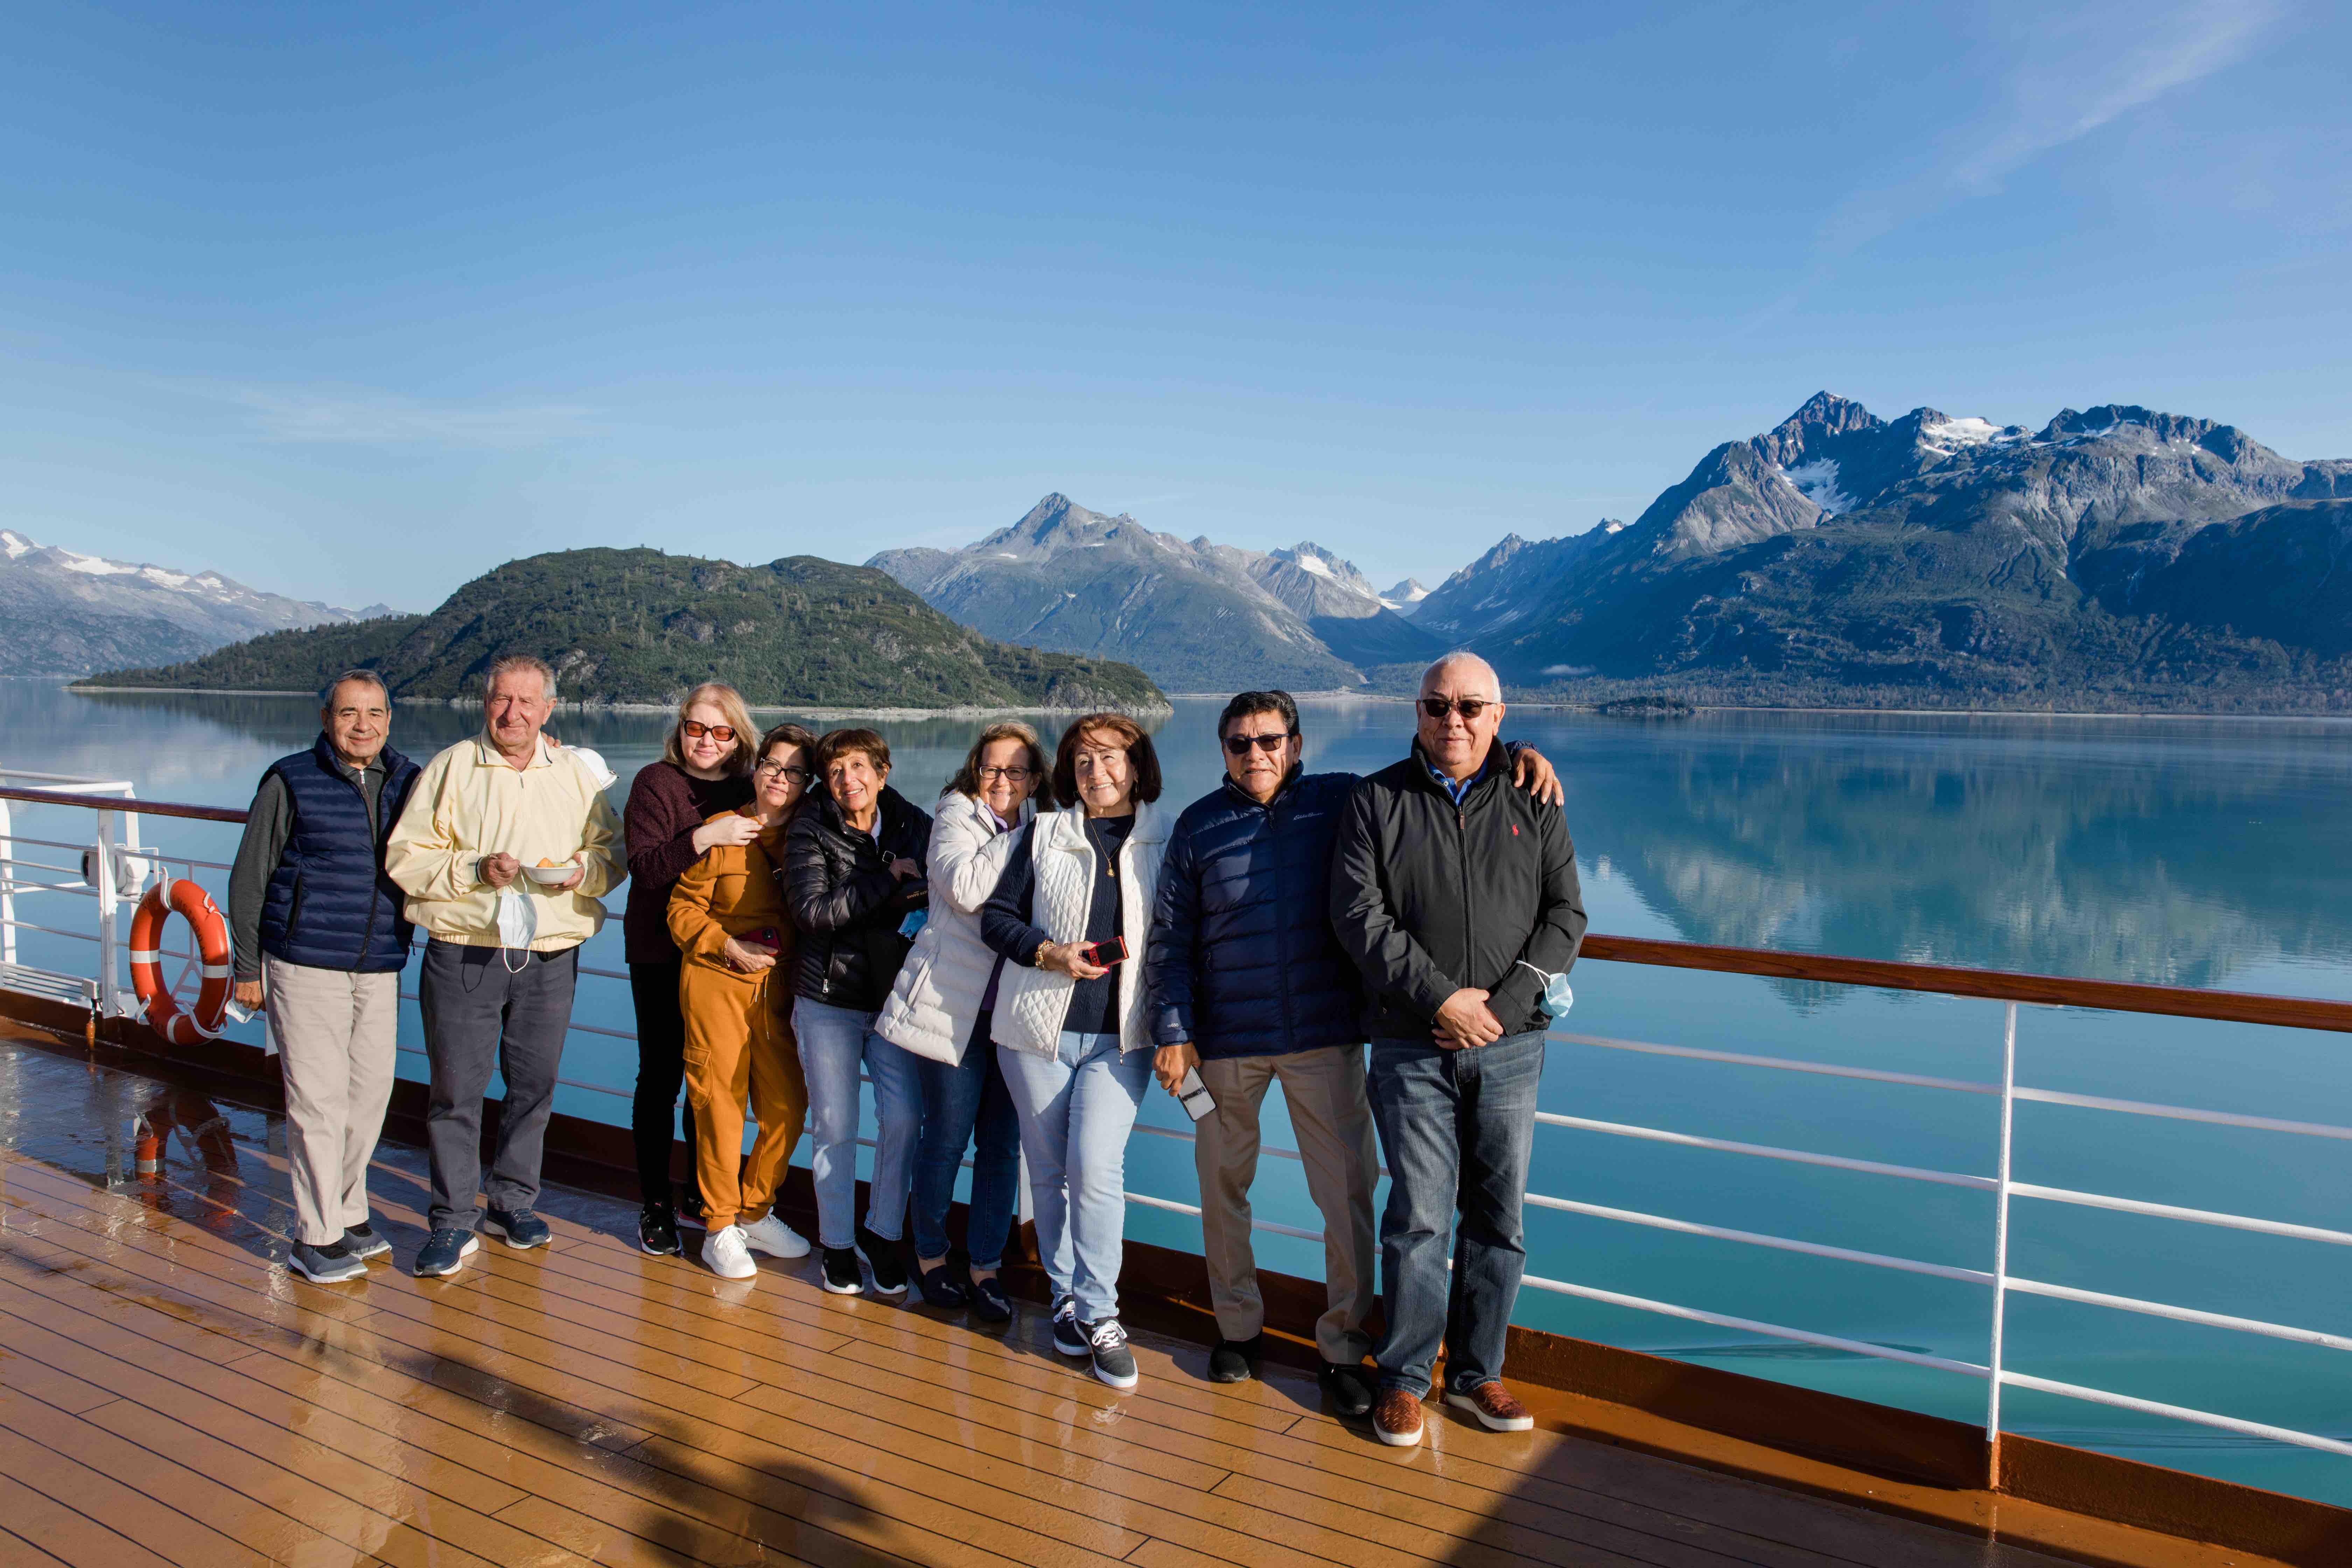 A group of travelers posing for a picture on the deck of a cruise ship